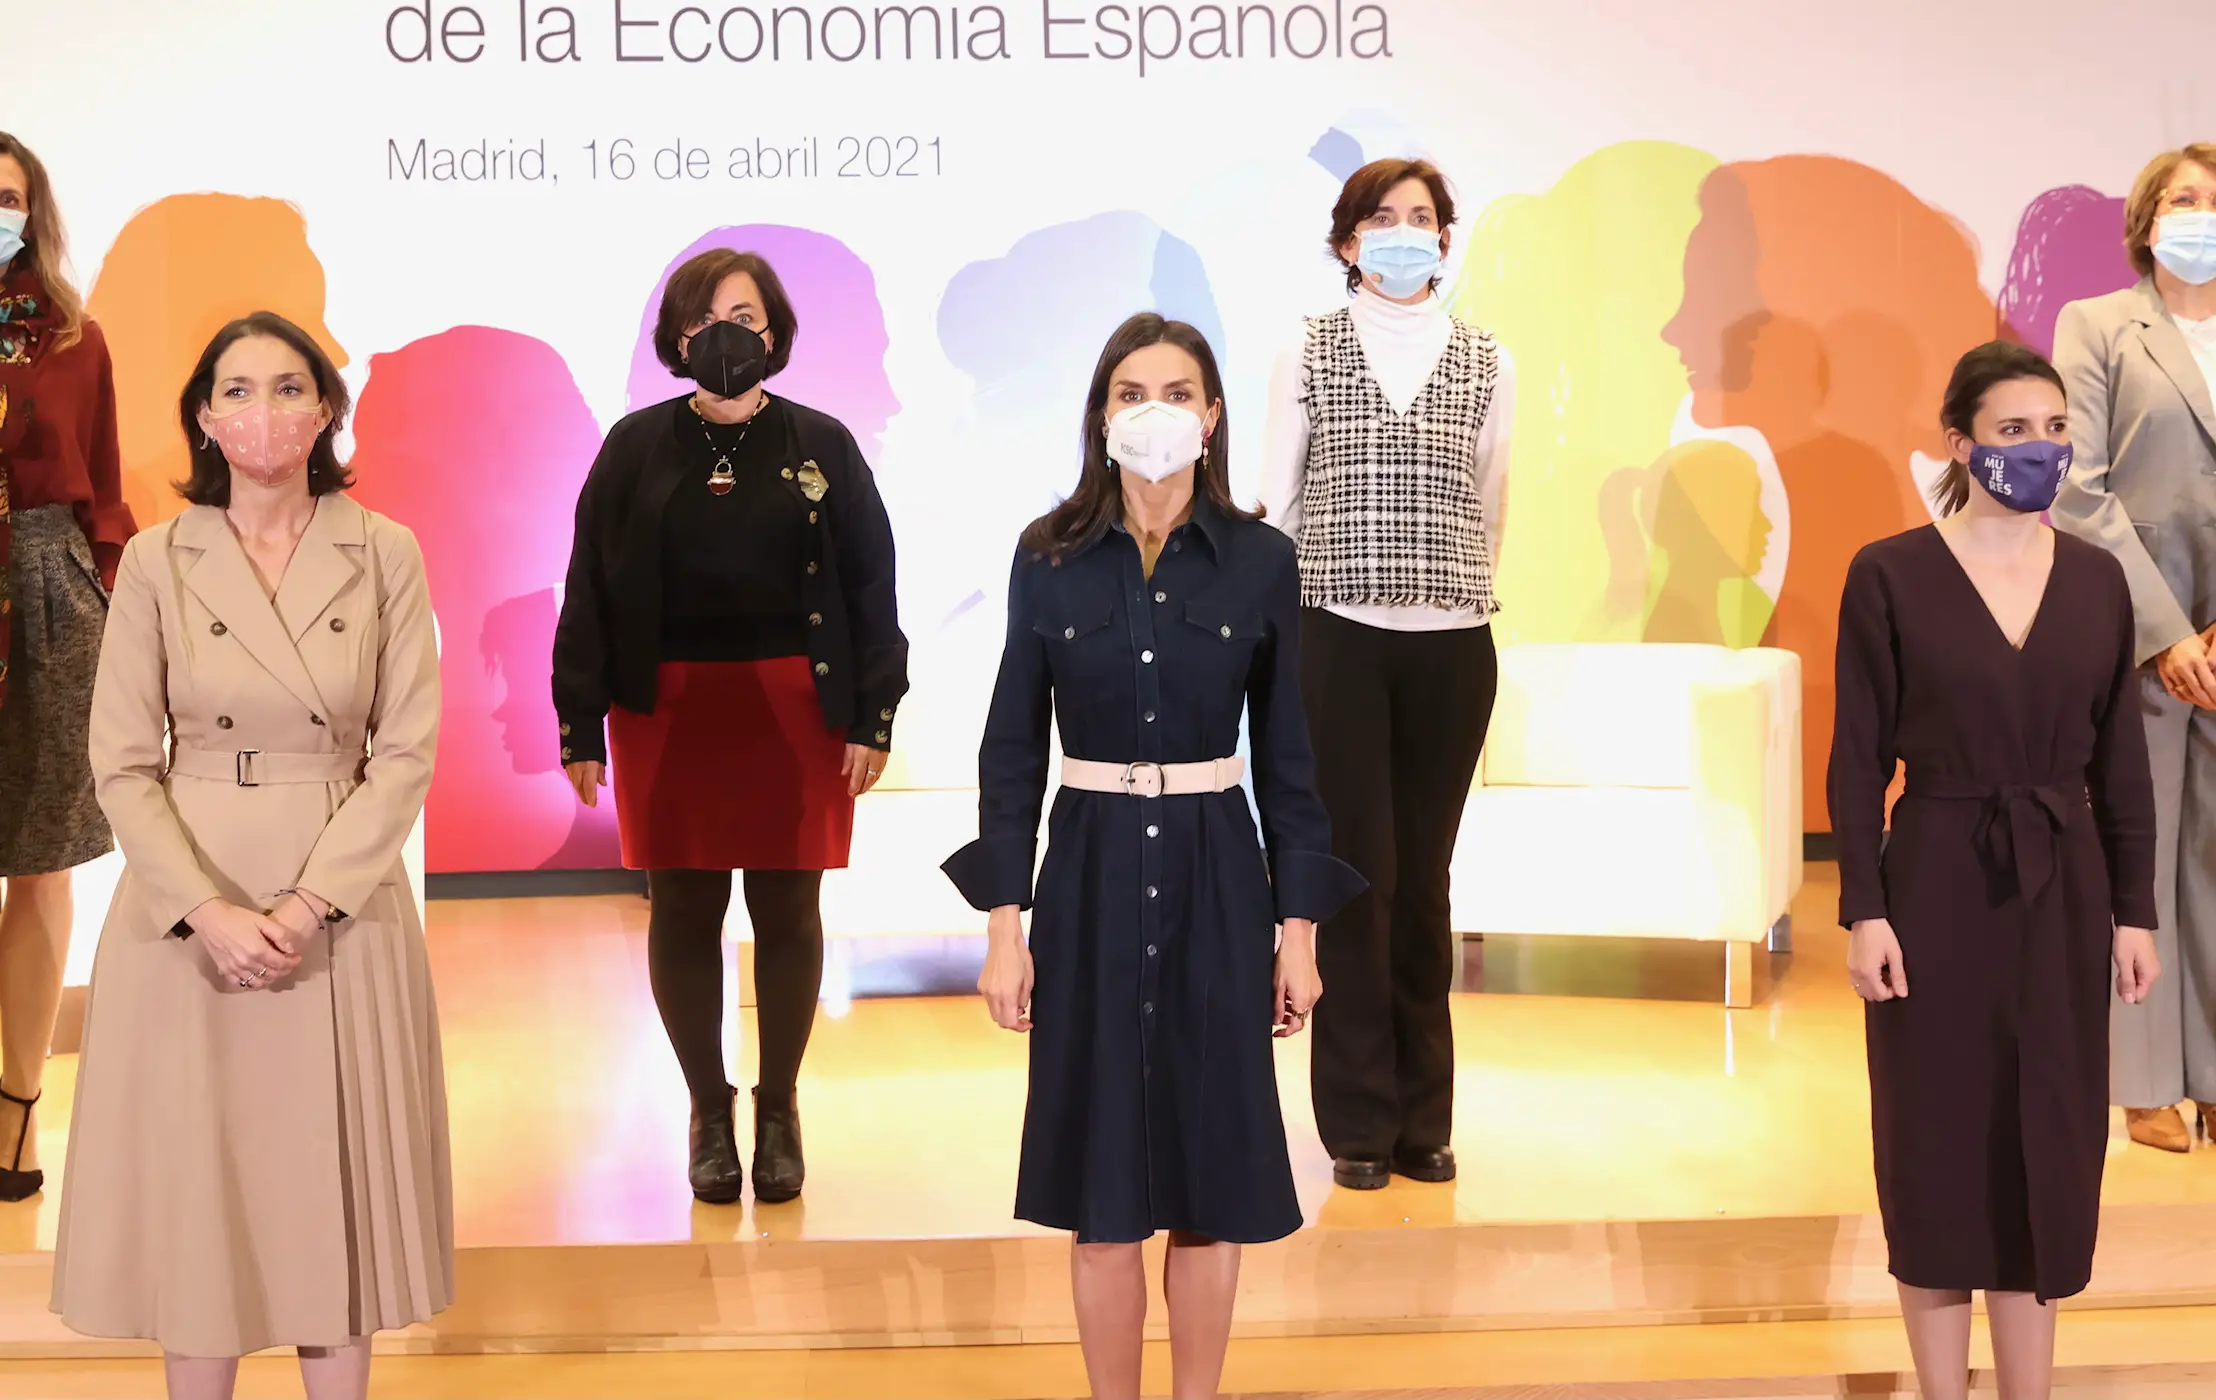 Queen Letizia of Spain presided over the presentation of the report of the Working Group on the Role of Women in the Internationalization of The Spanish Economy